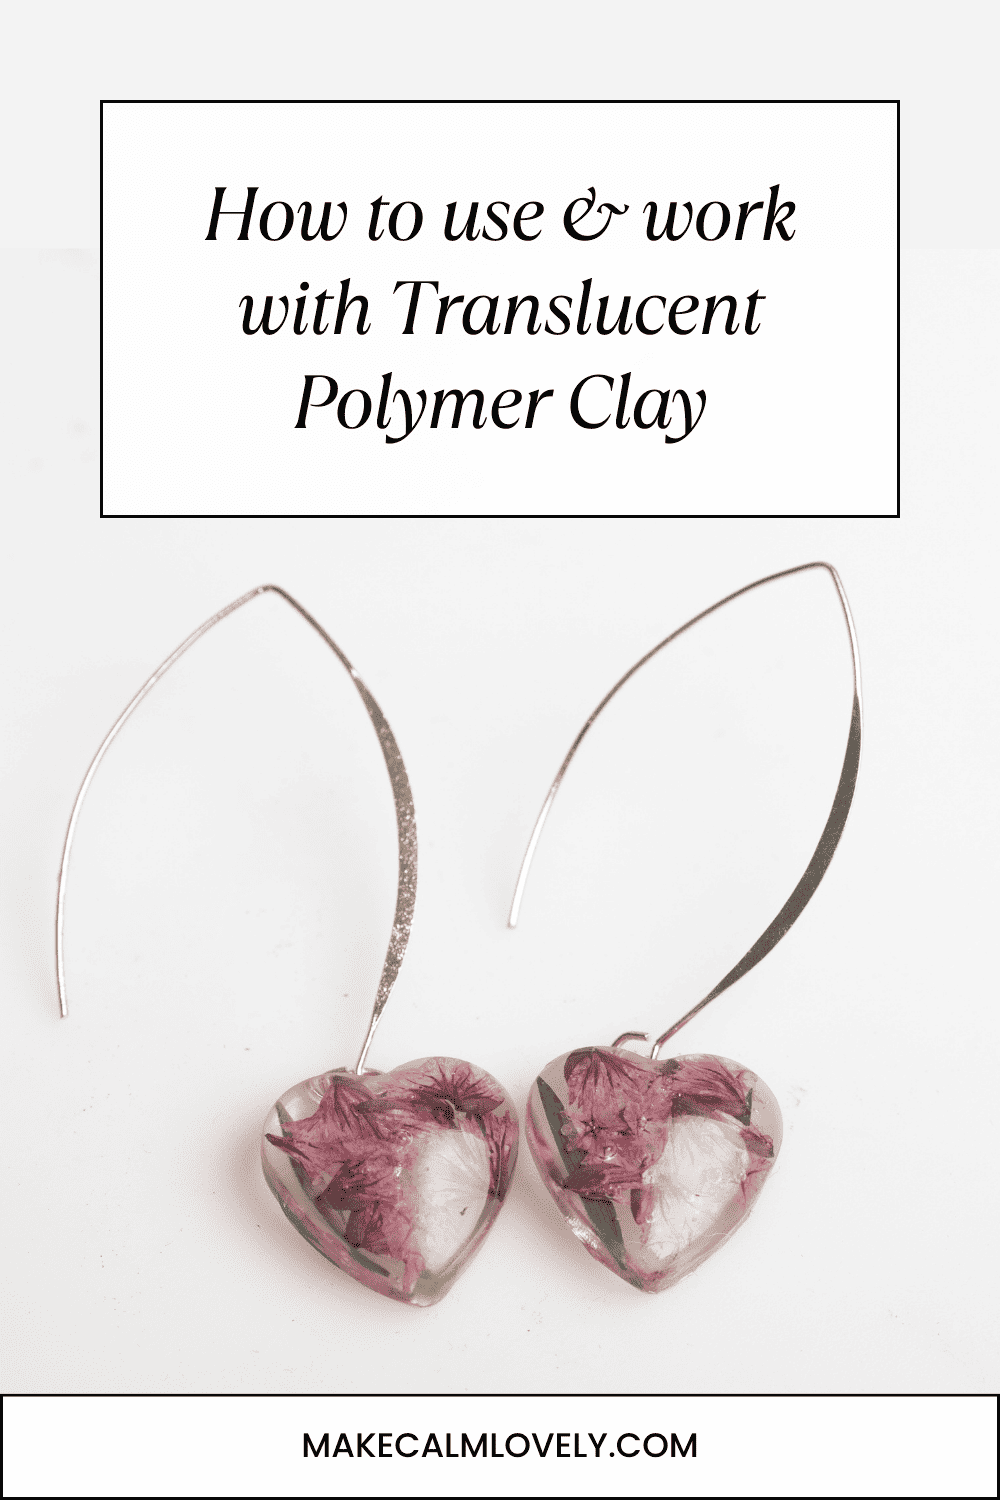 How to use & work with Translucent Polymer Clay